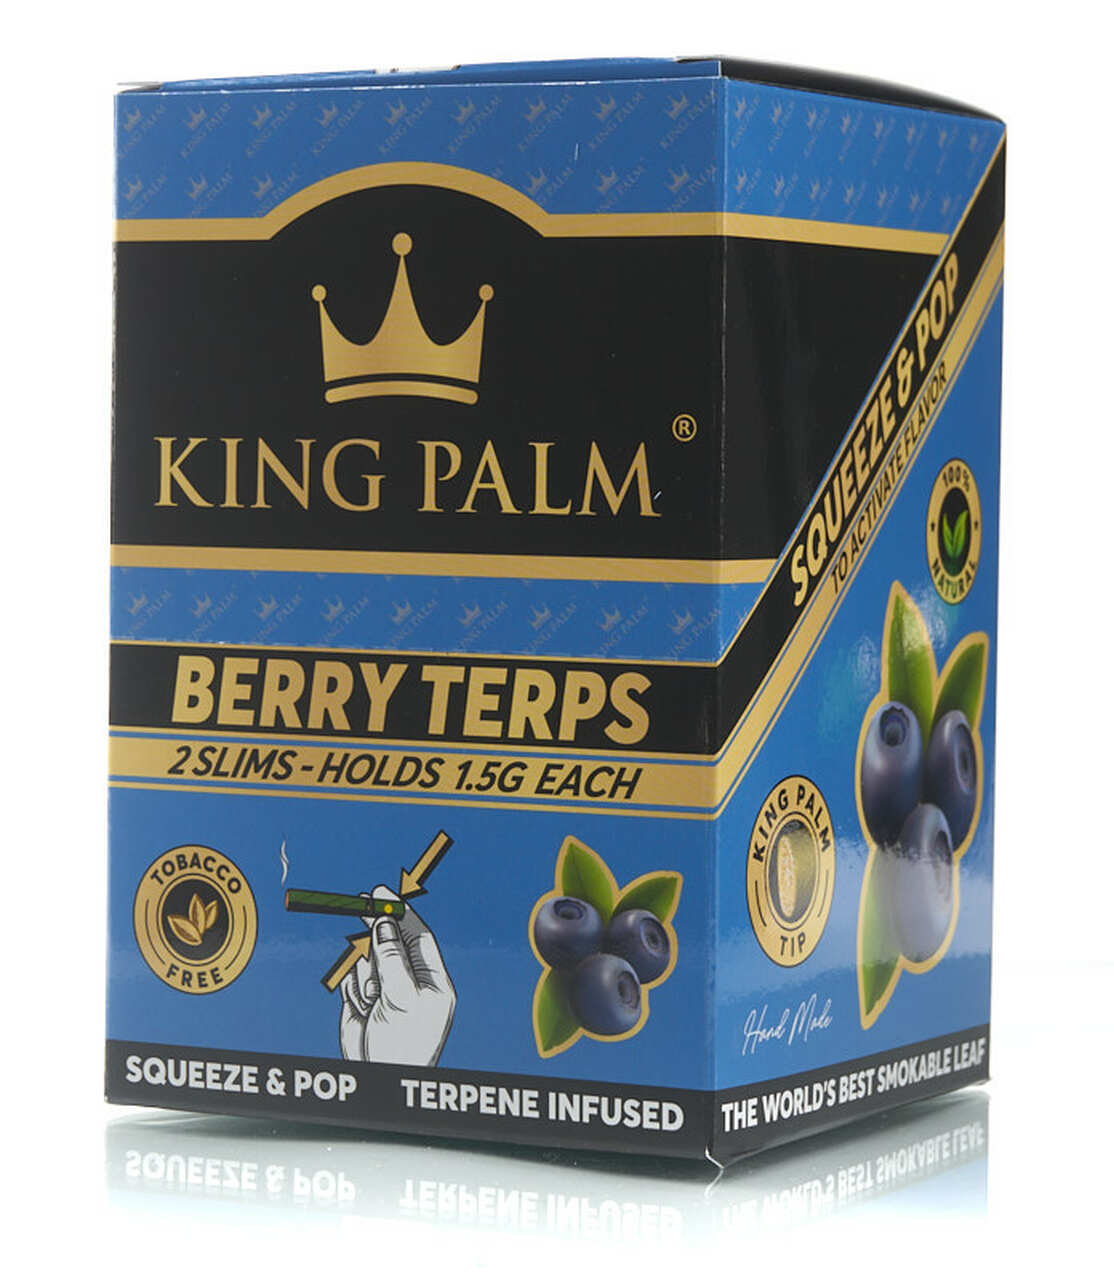 KING PALM 2 SLIMS HOLD 1.5G EACH BERRY TERPS